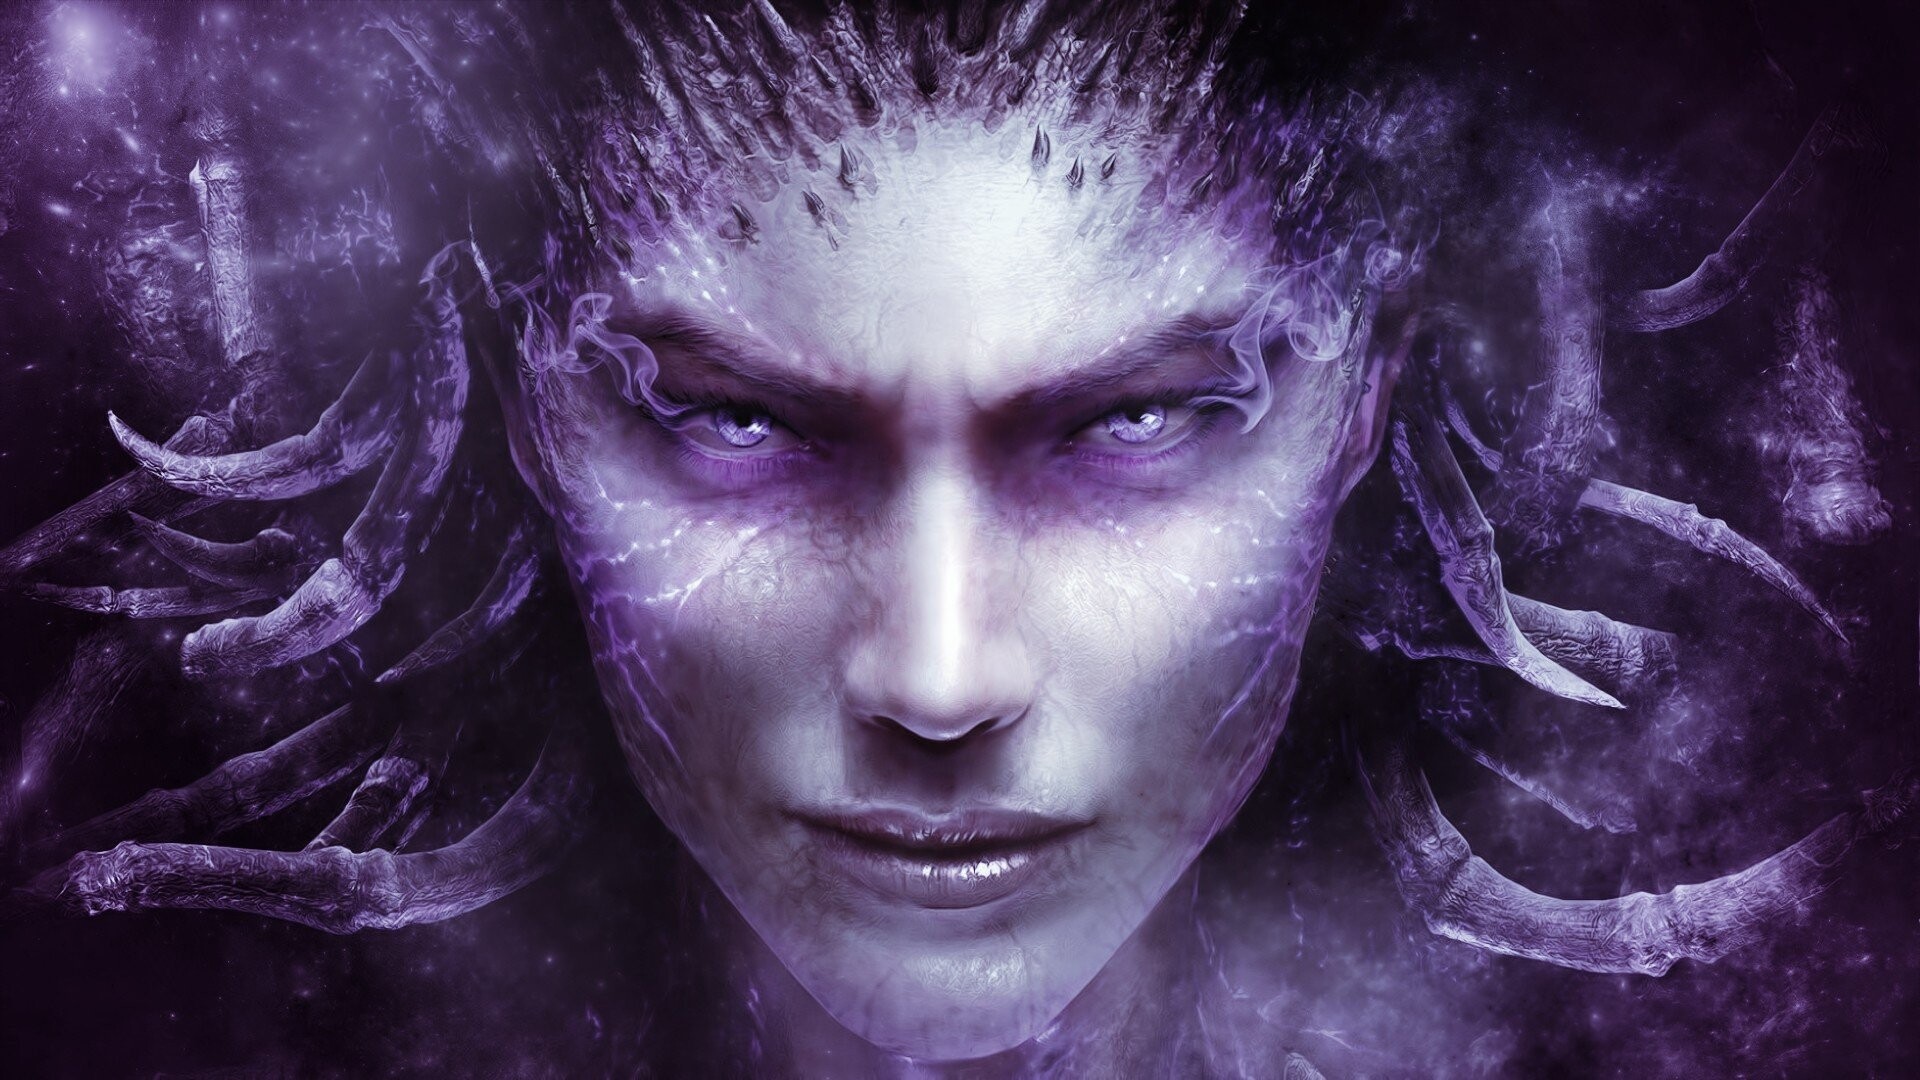 Ghost (Kerrigan): Starcraft II: Heart of the Swarm fan art, The second part of the StarCraft II trilogy developed by Blizzard Entertainment. 1920x1080 Full HD Background.